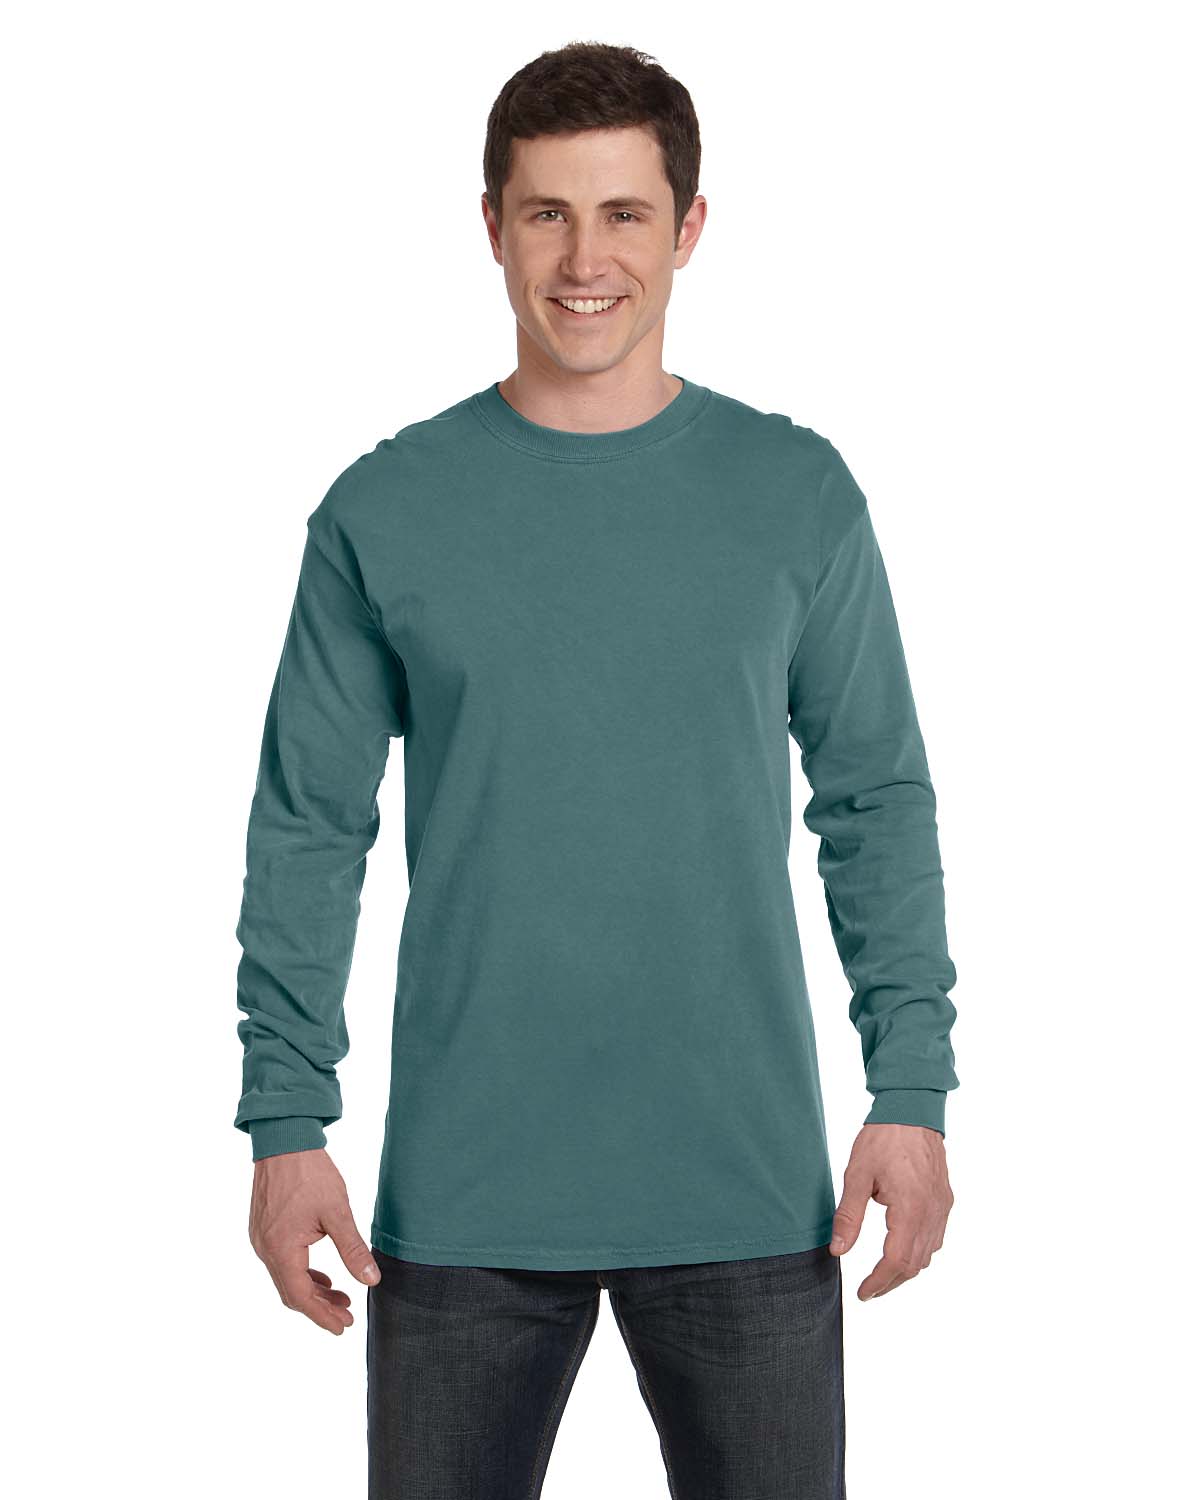 Comfort Colors C6014 Adult Heavyweight RS Long-Sleeve T-Shirt - Blue Spruce  - 3XL